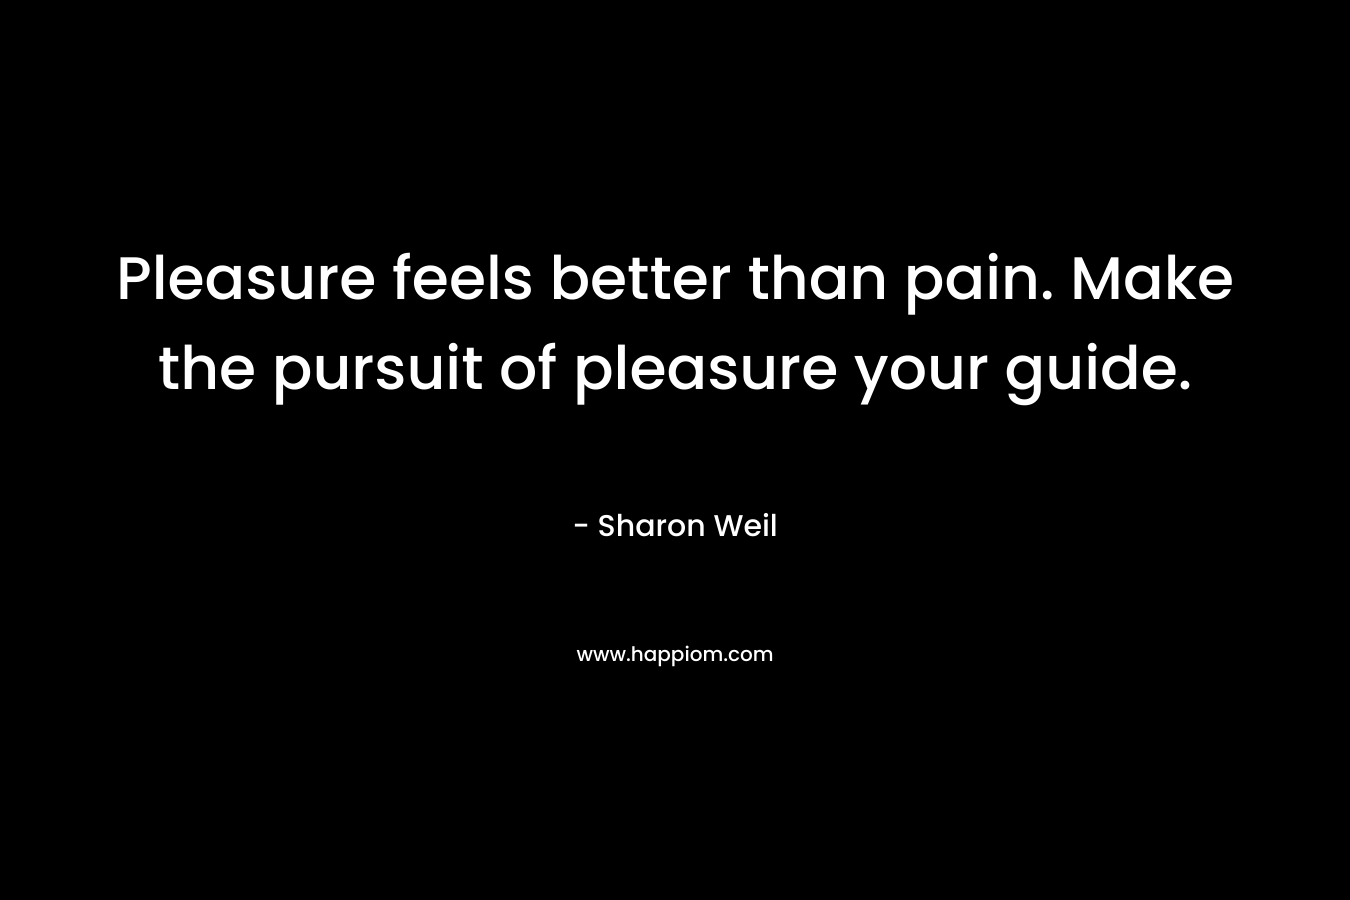 Pleasure feels better than pain. Make the pursuit of pleasure your guide.